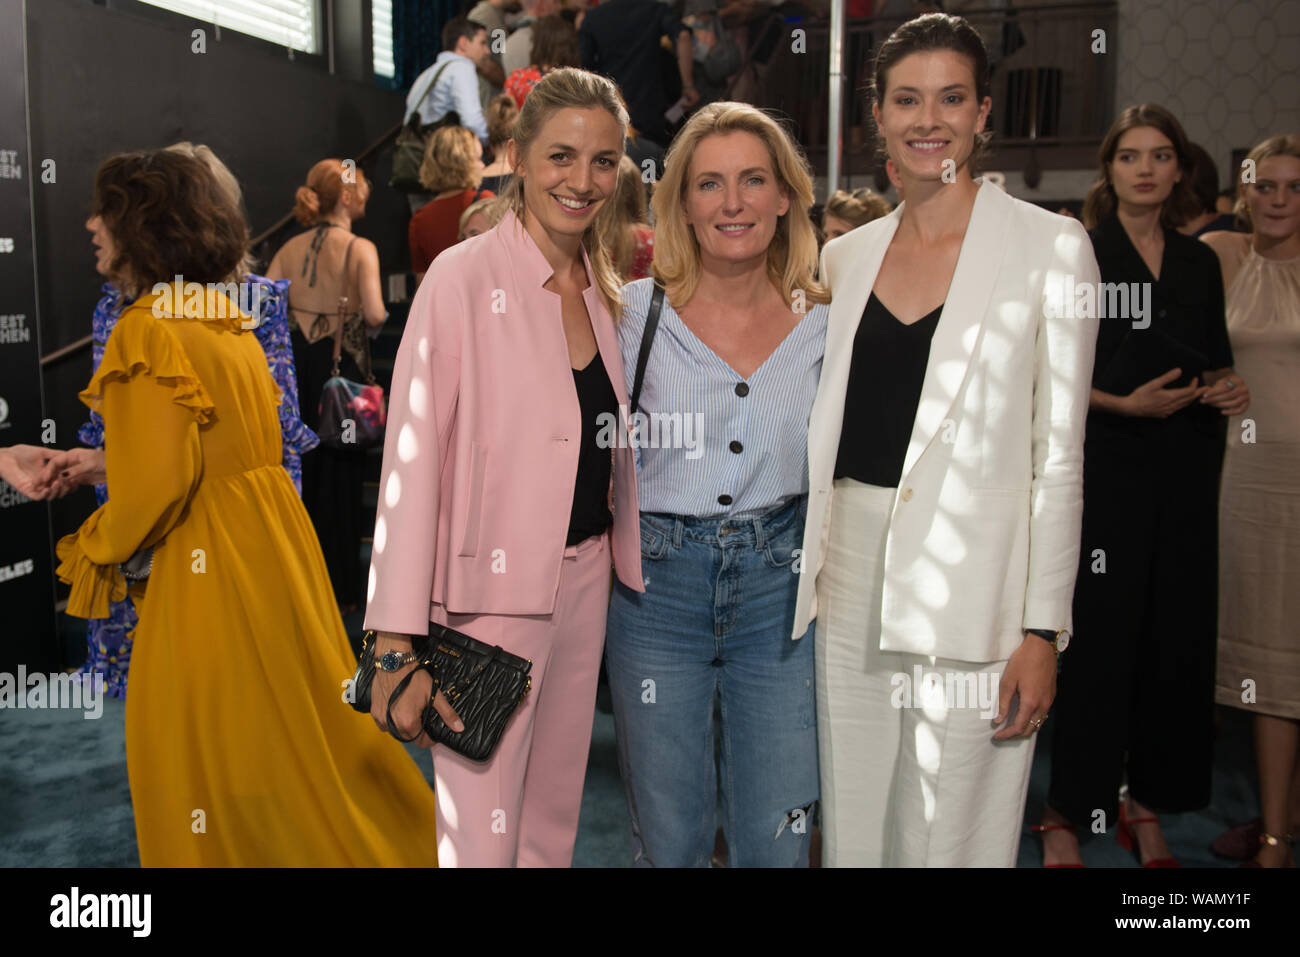 Producer and directors Leonie Stade, Annika Blendl , Maria Furtwängler, before the screening of their film All I Never Wanted at Filmfest München 2019 Stock Photo